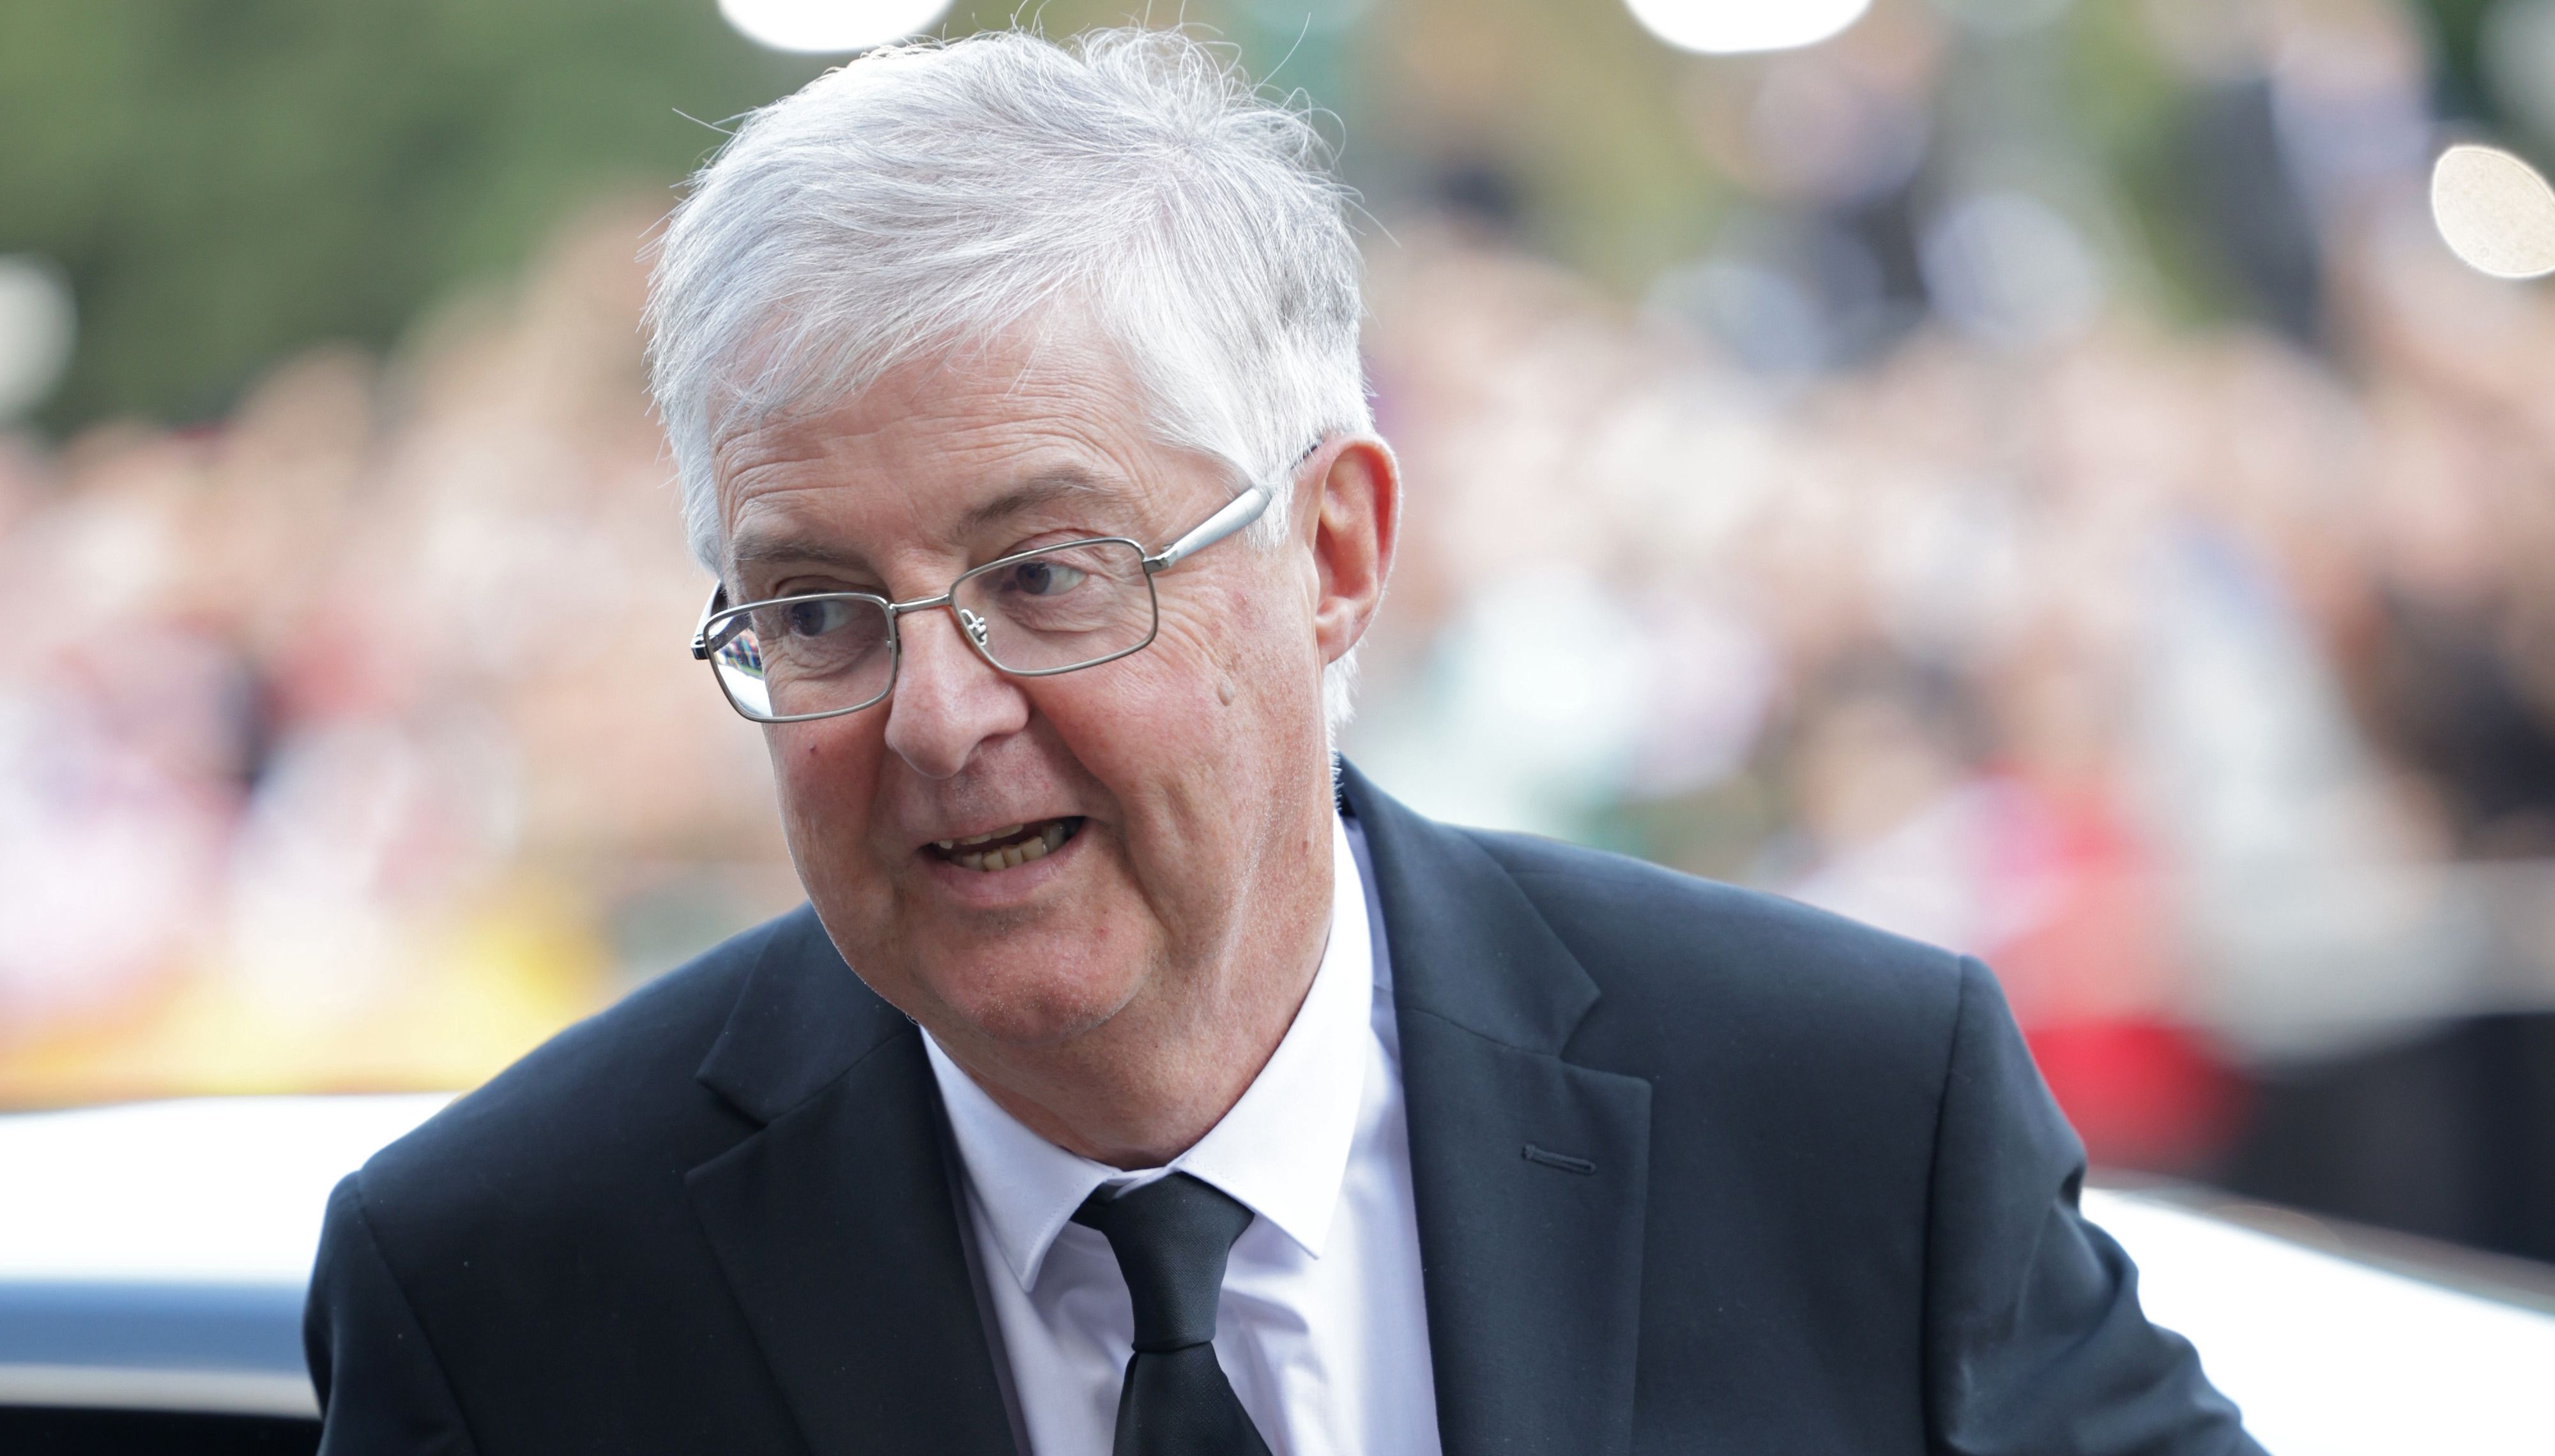 First Minister of Wales Mark Drakeford arrives for a reception for local charities at Cardiff Castle in Wales. Picture date: Friday September 16, 2022.